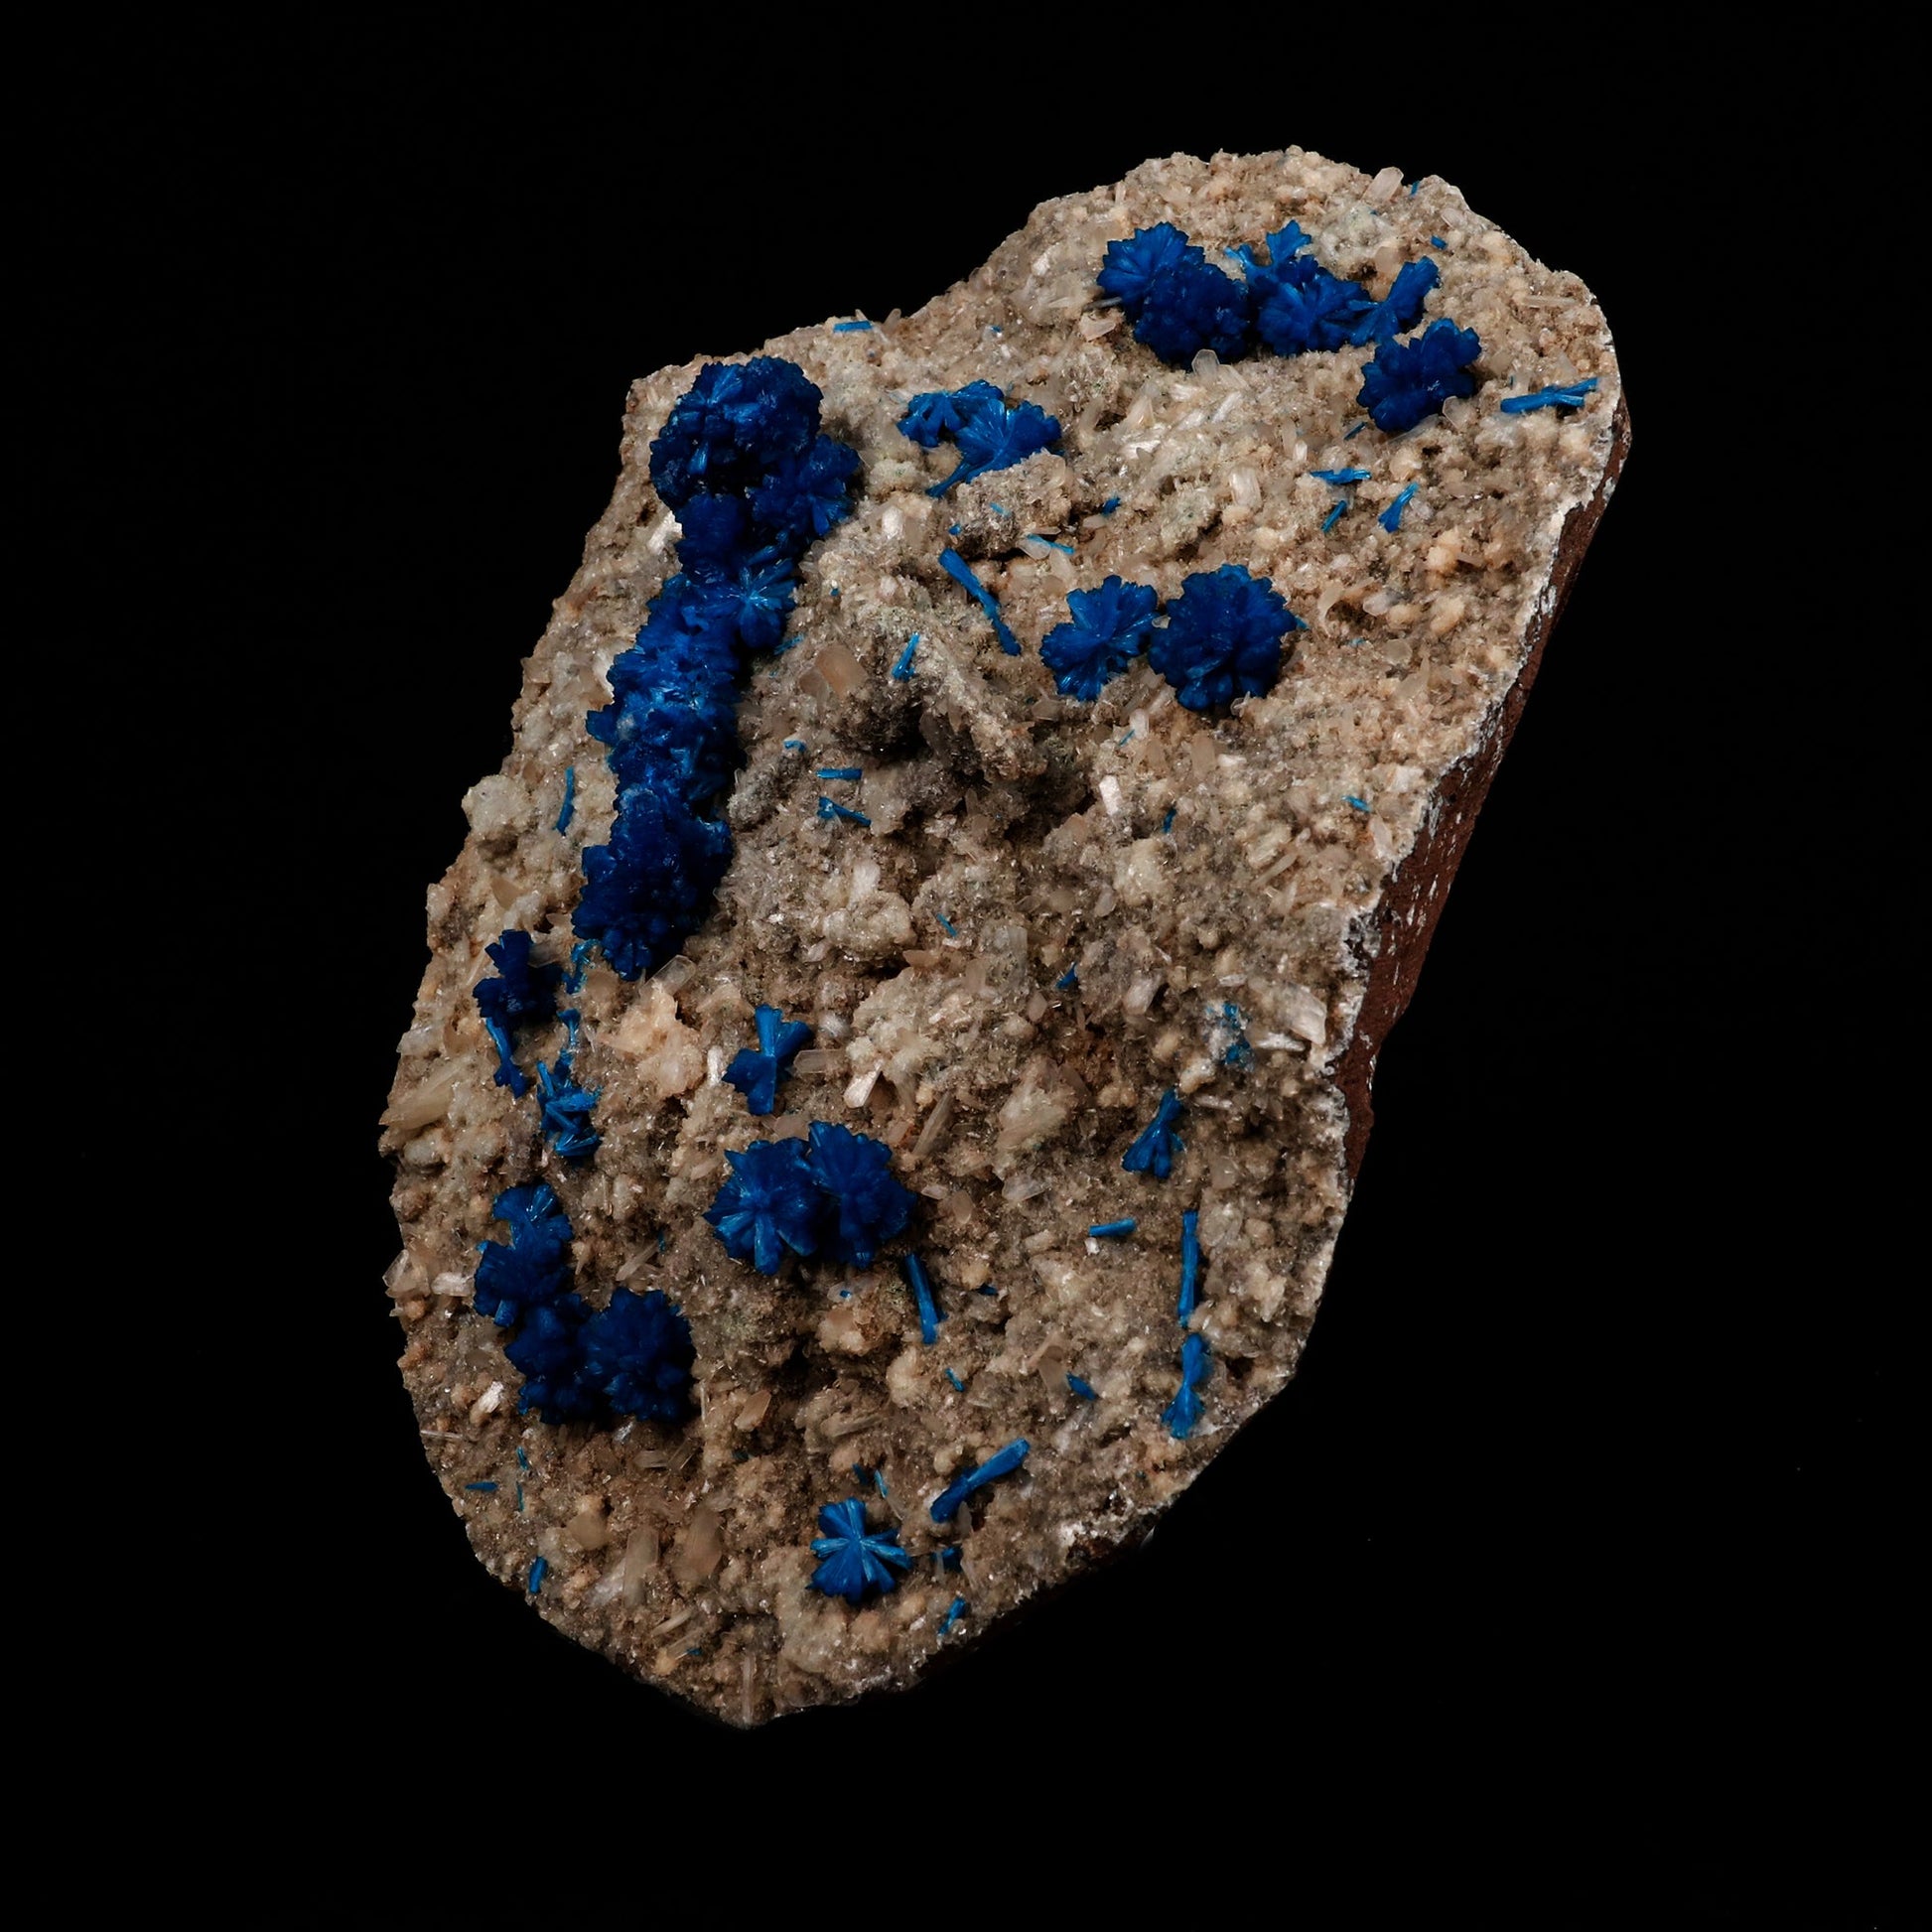 Cavansite on Heulandite Natural Mineral Specimen # B 5317  https://www.superbminerals.us/products/cavansite-on-heulandite-natural-mineral-specimen-b-5317  Features: Crystals of deep blue cavansite on white heulandite. Perfectly crafted from the legendary, closed Wagholi Mines in&nbsp; Poona, Maharashtra. Primary Mineral(s):&nbsp;Cavansite Secondary Mineral(s):&nbsp;N/AMatrix:&nbsp;Heulandite 7.5&nbsp;Inch x&nbsp;5.5 InchWeight :&nbsp;1452 GmsLocality: Pune, Maharashtra